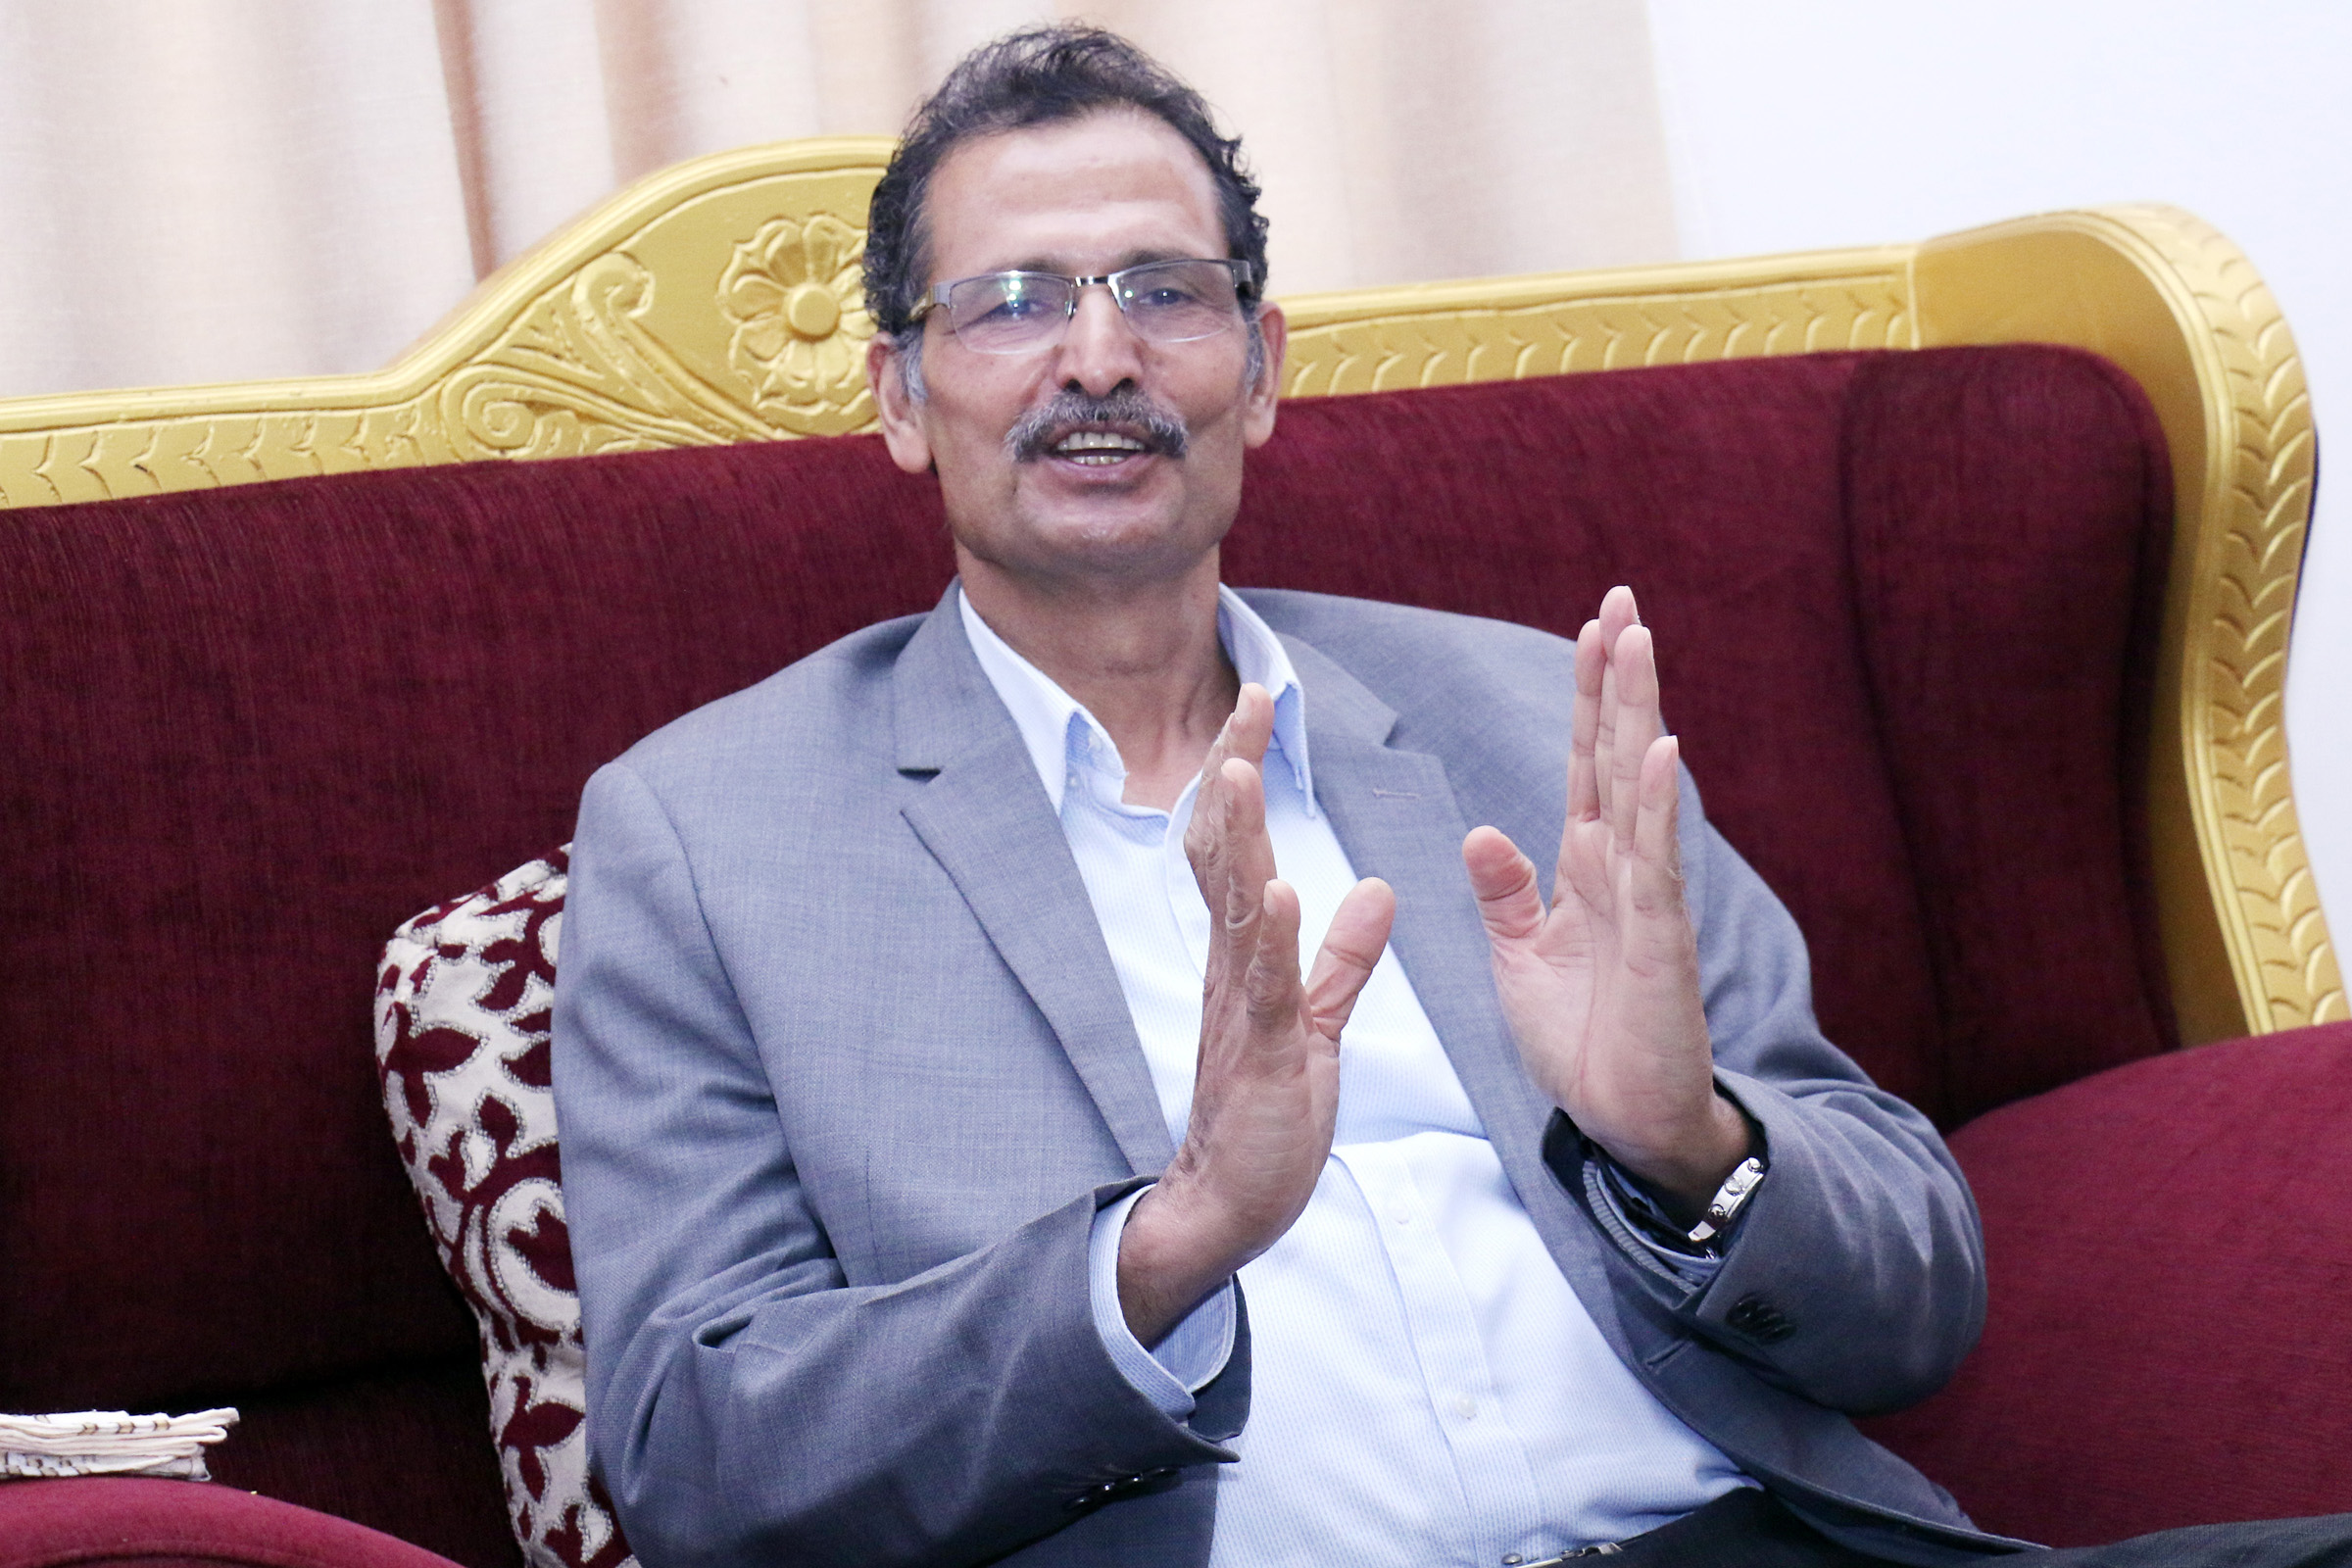 Role of Federal Parliament important during difficult time: Speaker Sapkota